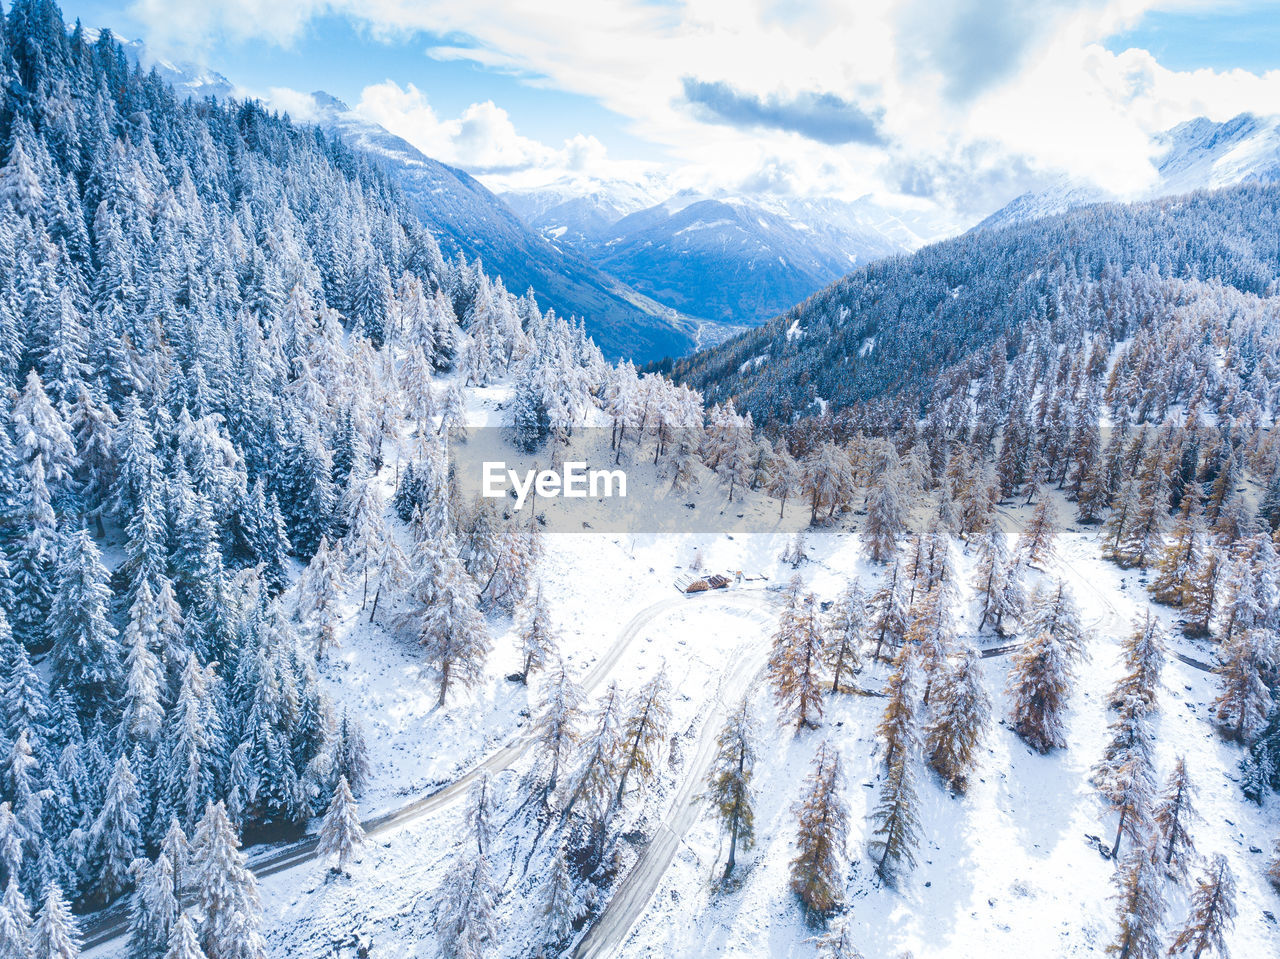 SCENIC VIEW OF SNOW MOUNTAINS AGAINST SKY